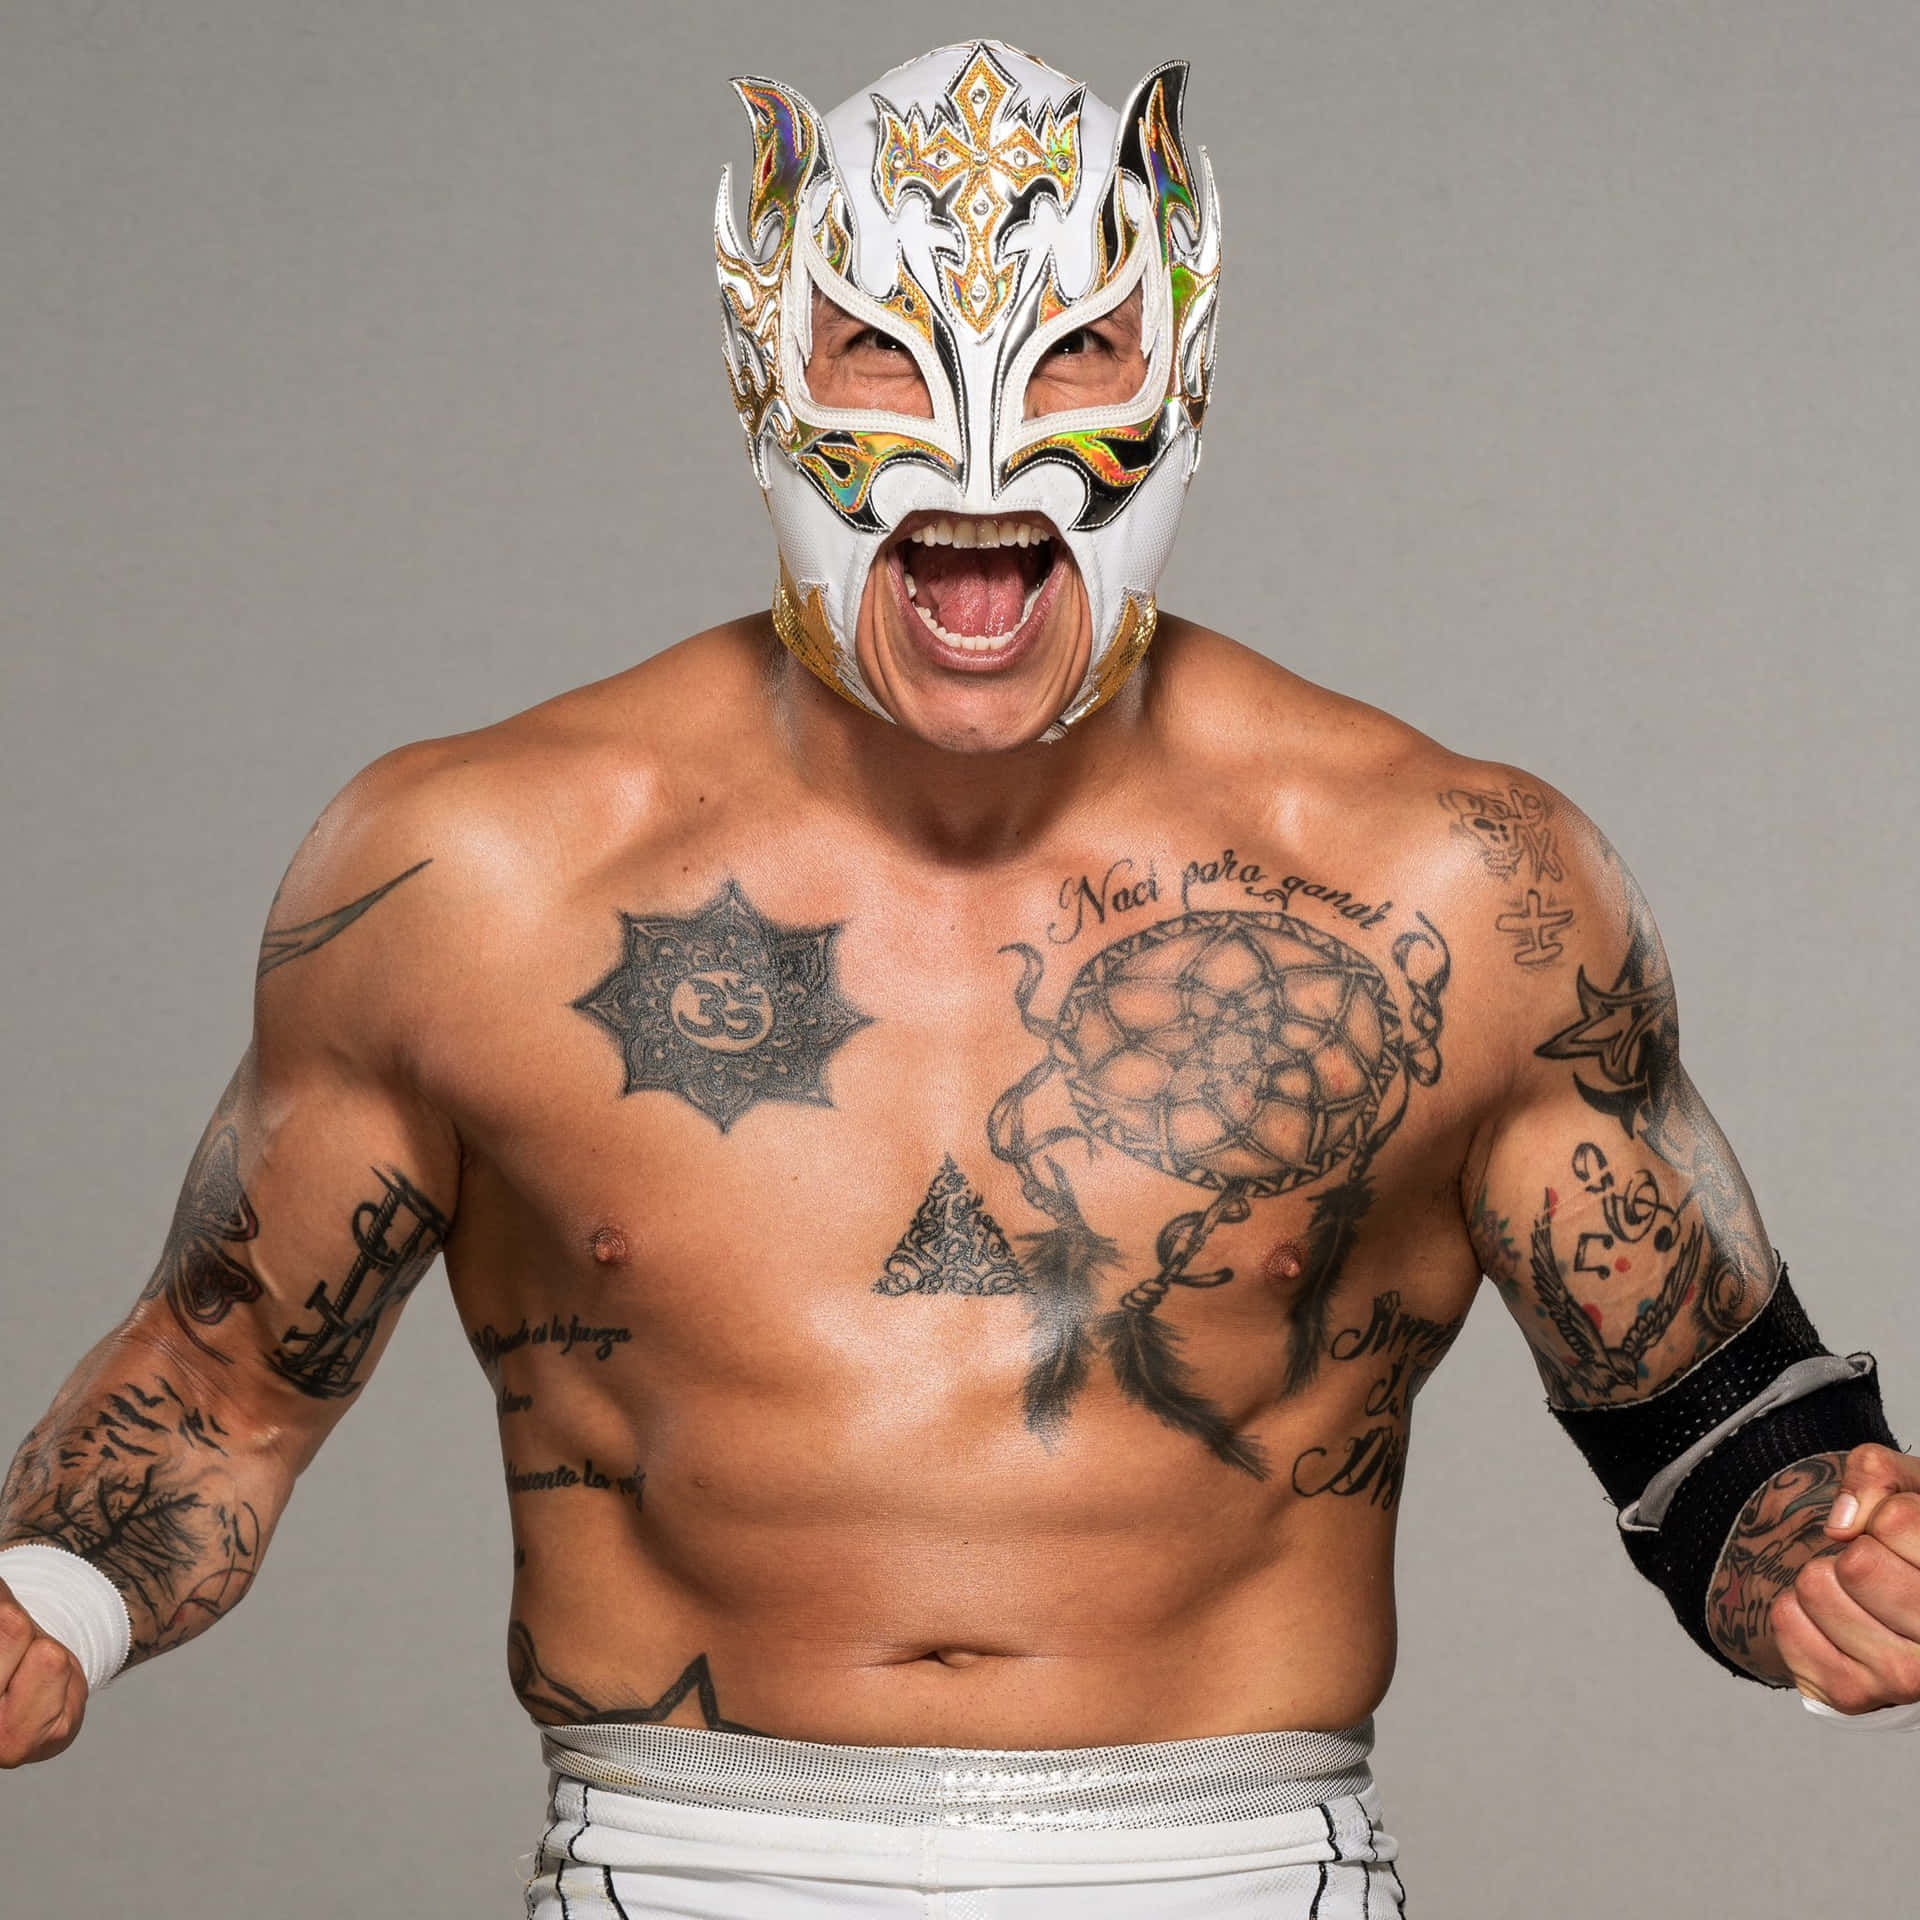 Rey Fenix, the Luchador Superstar, in his Signature White Mask Wallpaper